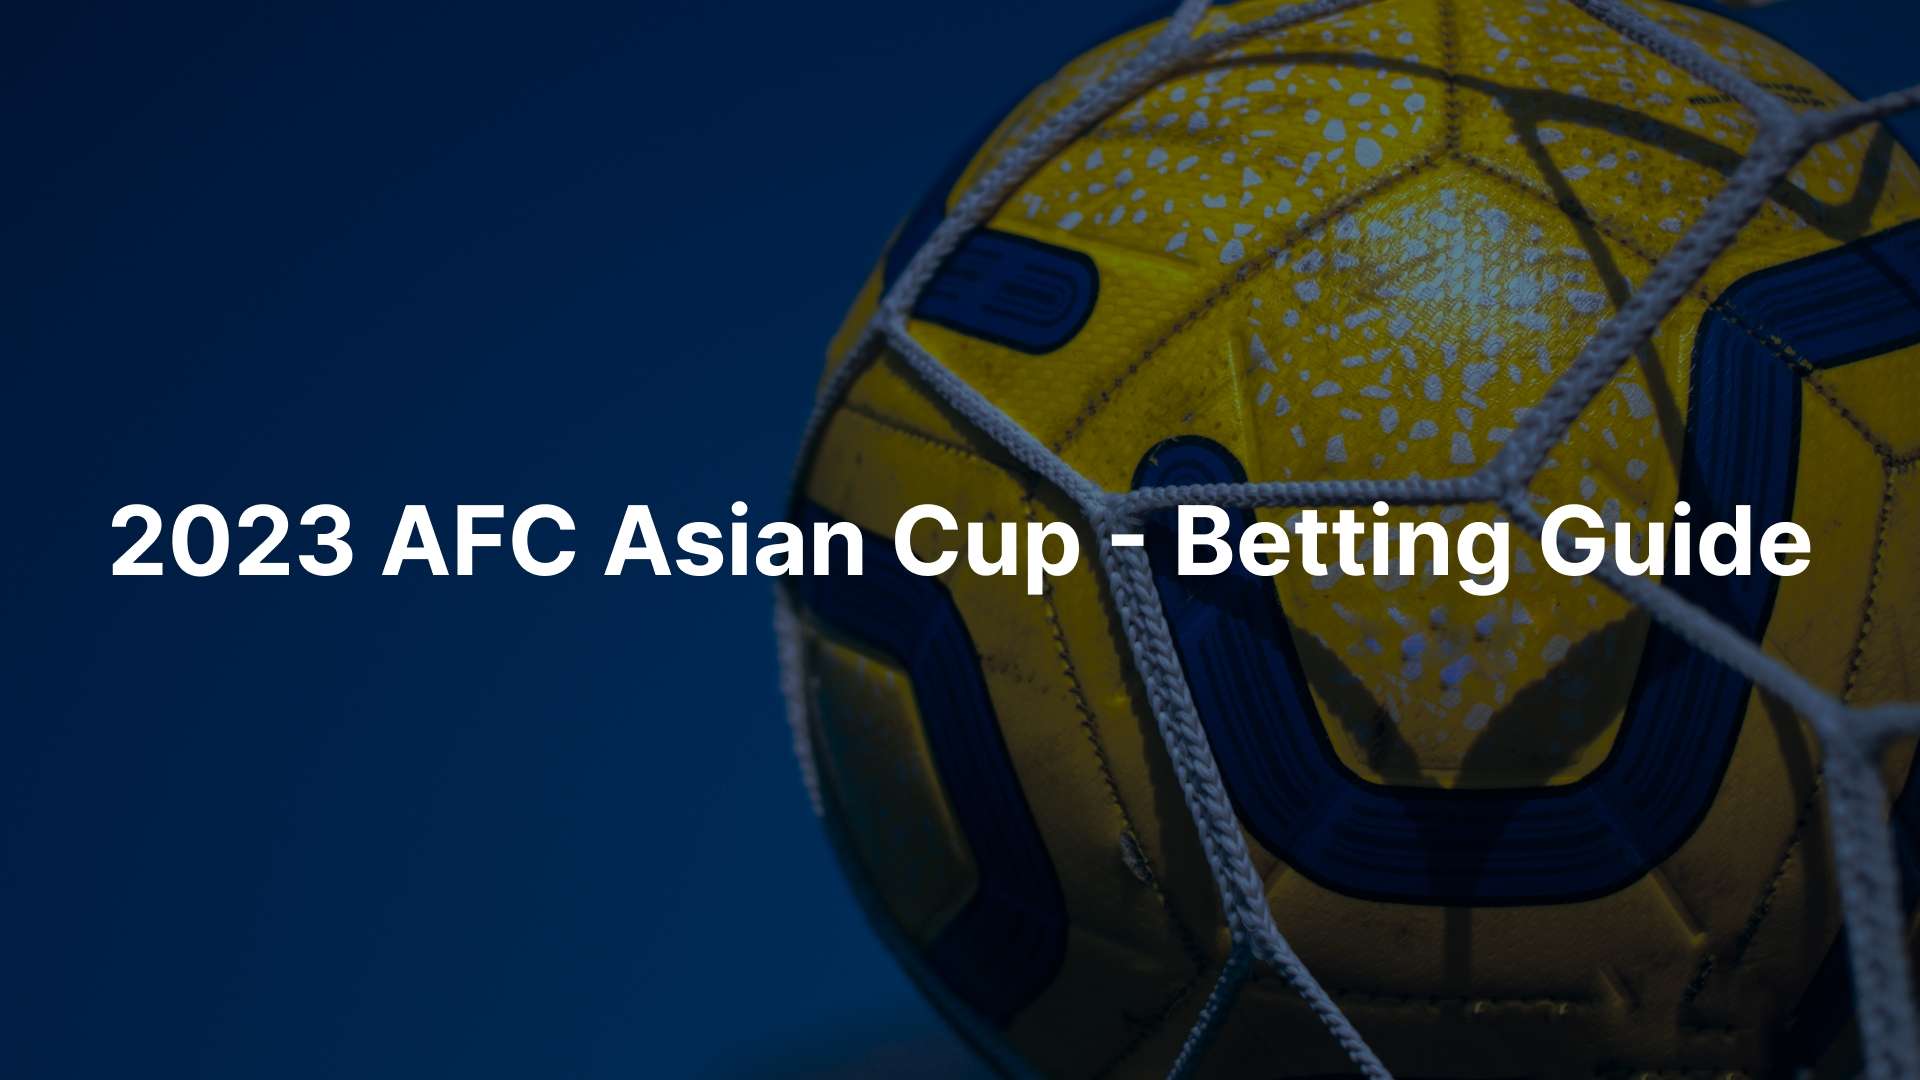 AFC Asian Cup betting guide